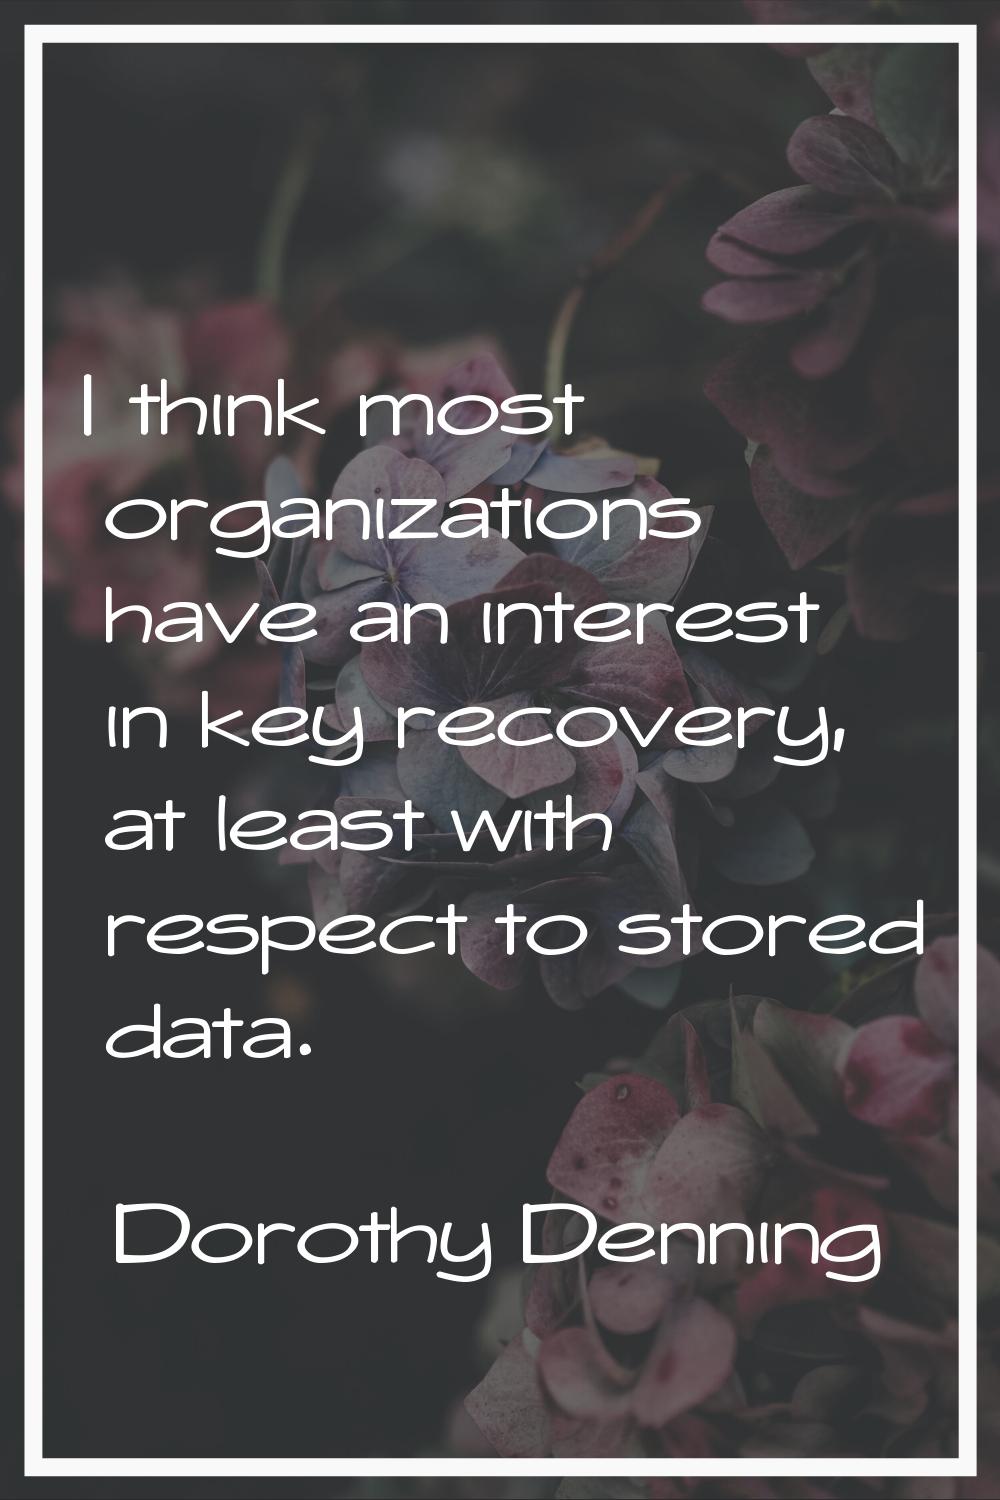 I think most organizations have an interest in key recovery, at least with respect to stored data.